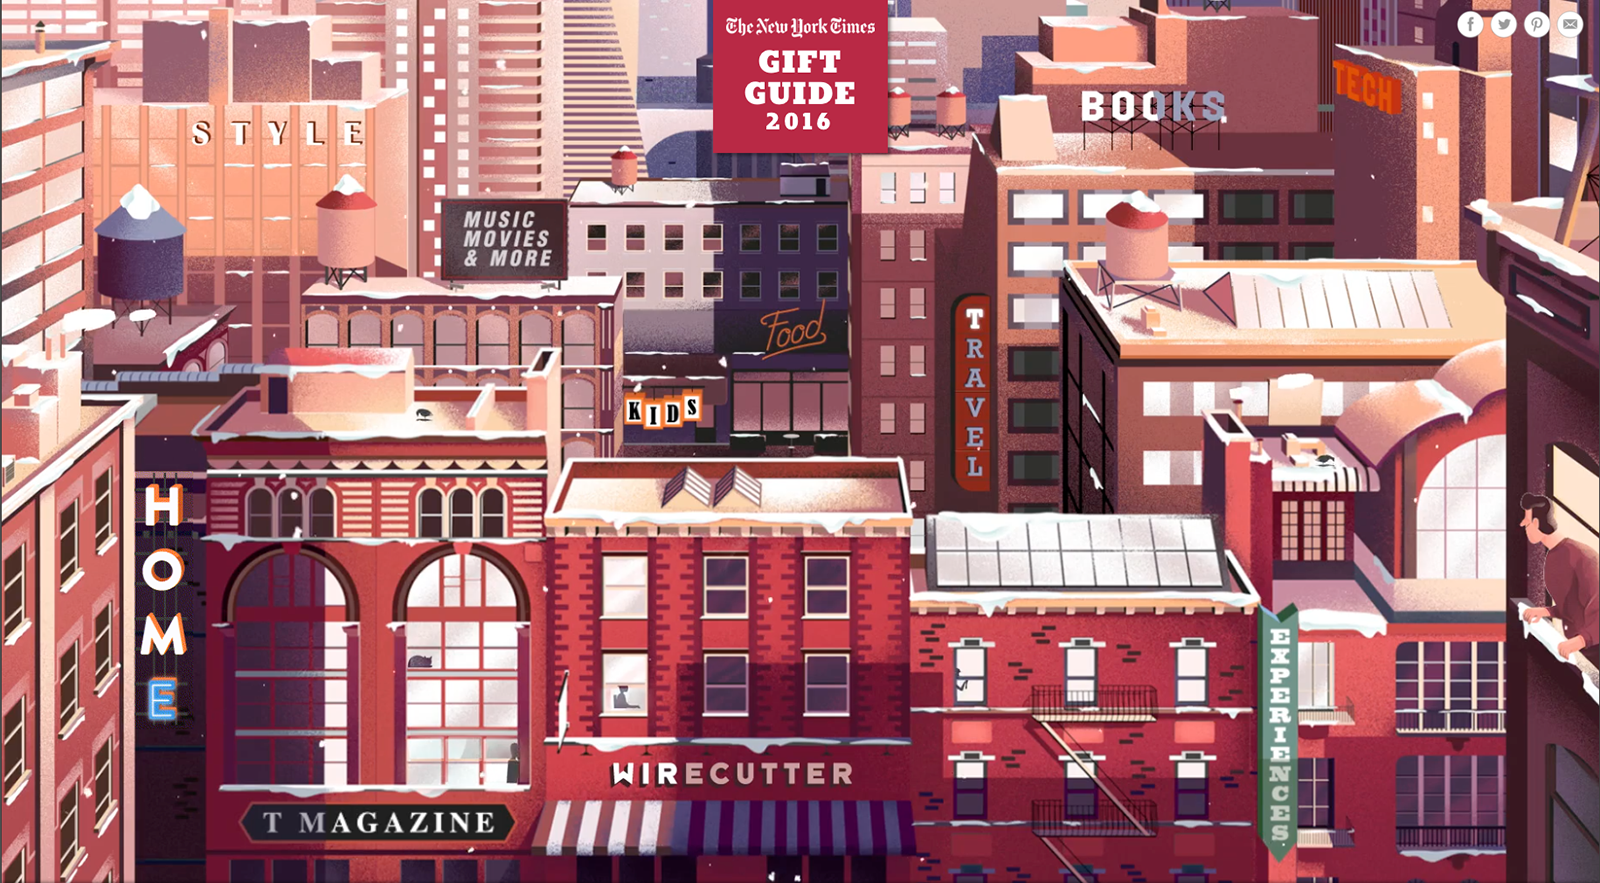 Illustration: The New York Times Gift Guide